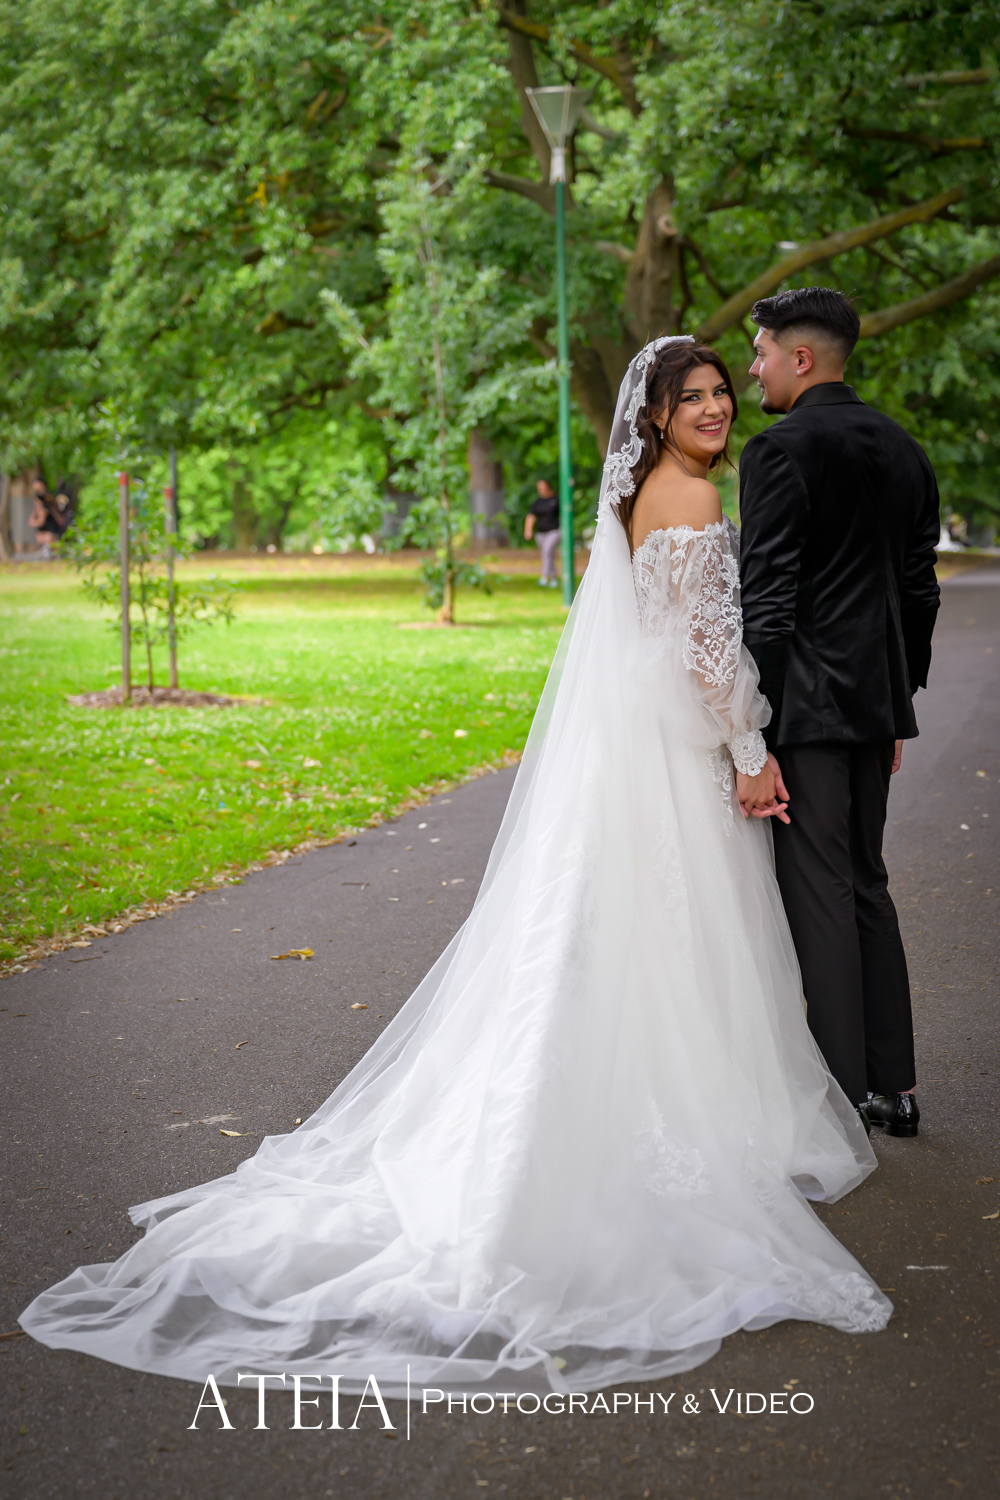 , Joy and Ariki&#8217;s wedding photography at Fior Parkville captured by ATEIA Photography &#038; Video